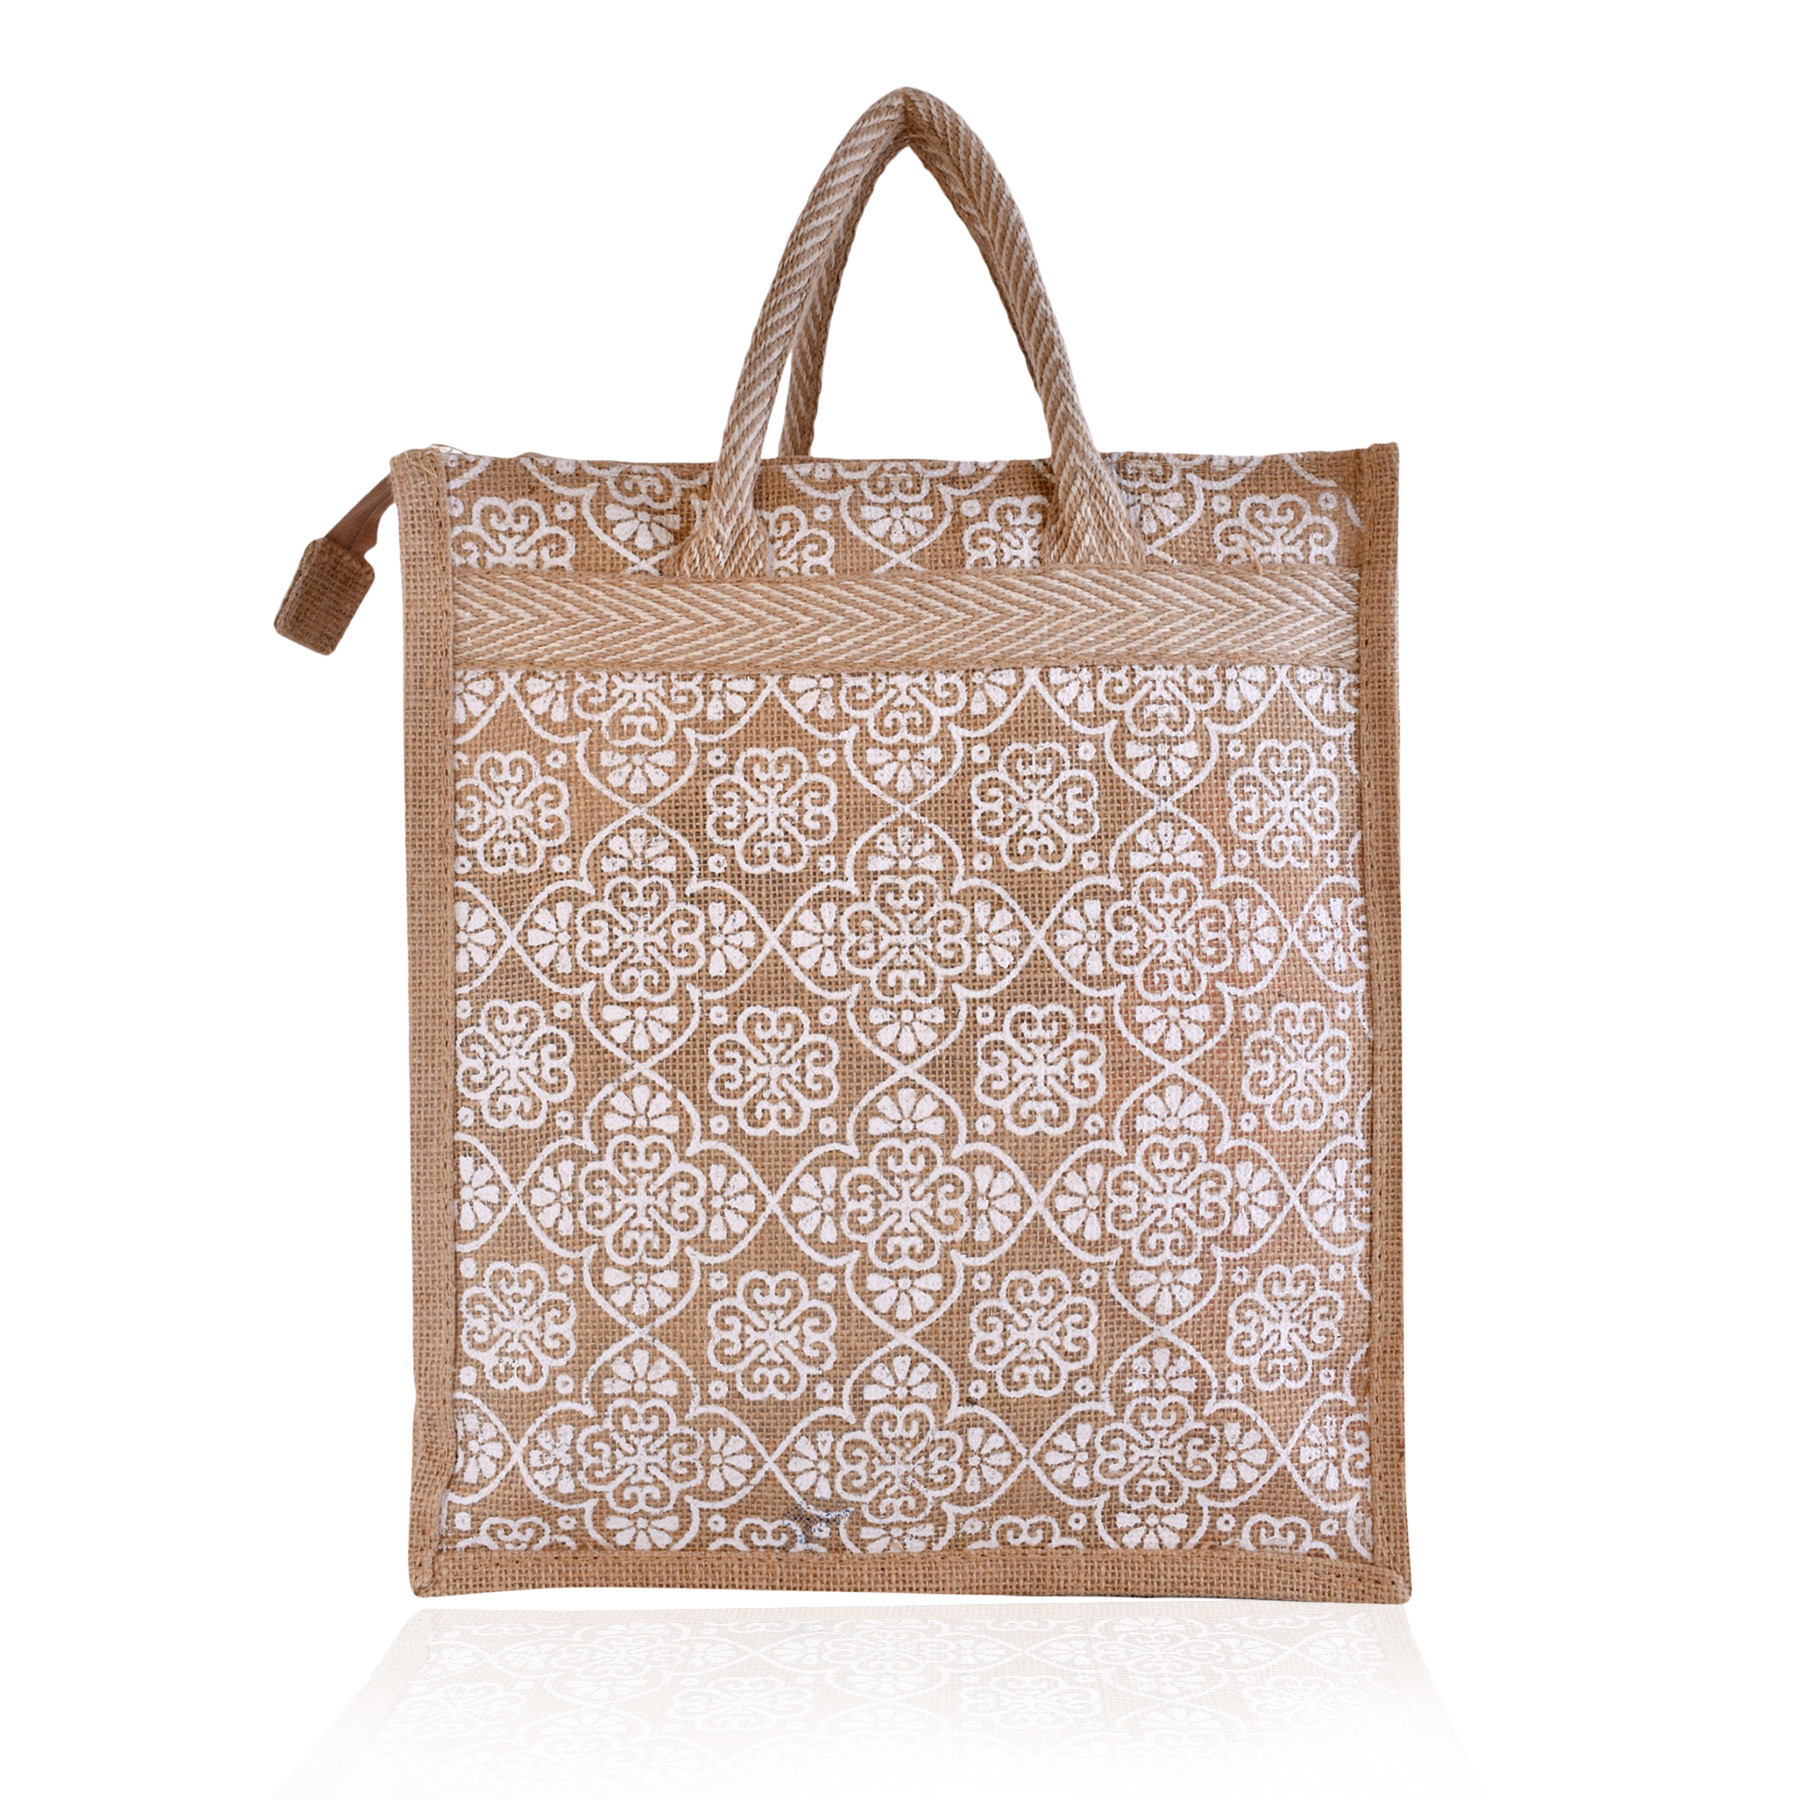 Kuber Industries Grocery Bag | Jute Carry Bag | Lunch Bags for Office | Zipper Grocery Bag with Handle | Vegetable Bag | White Flower Shopping Bag | Medium | Brown